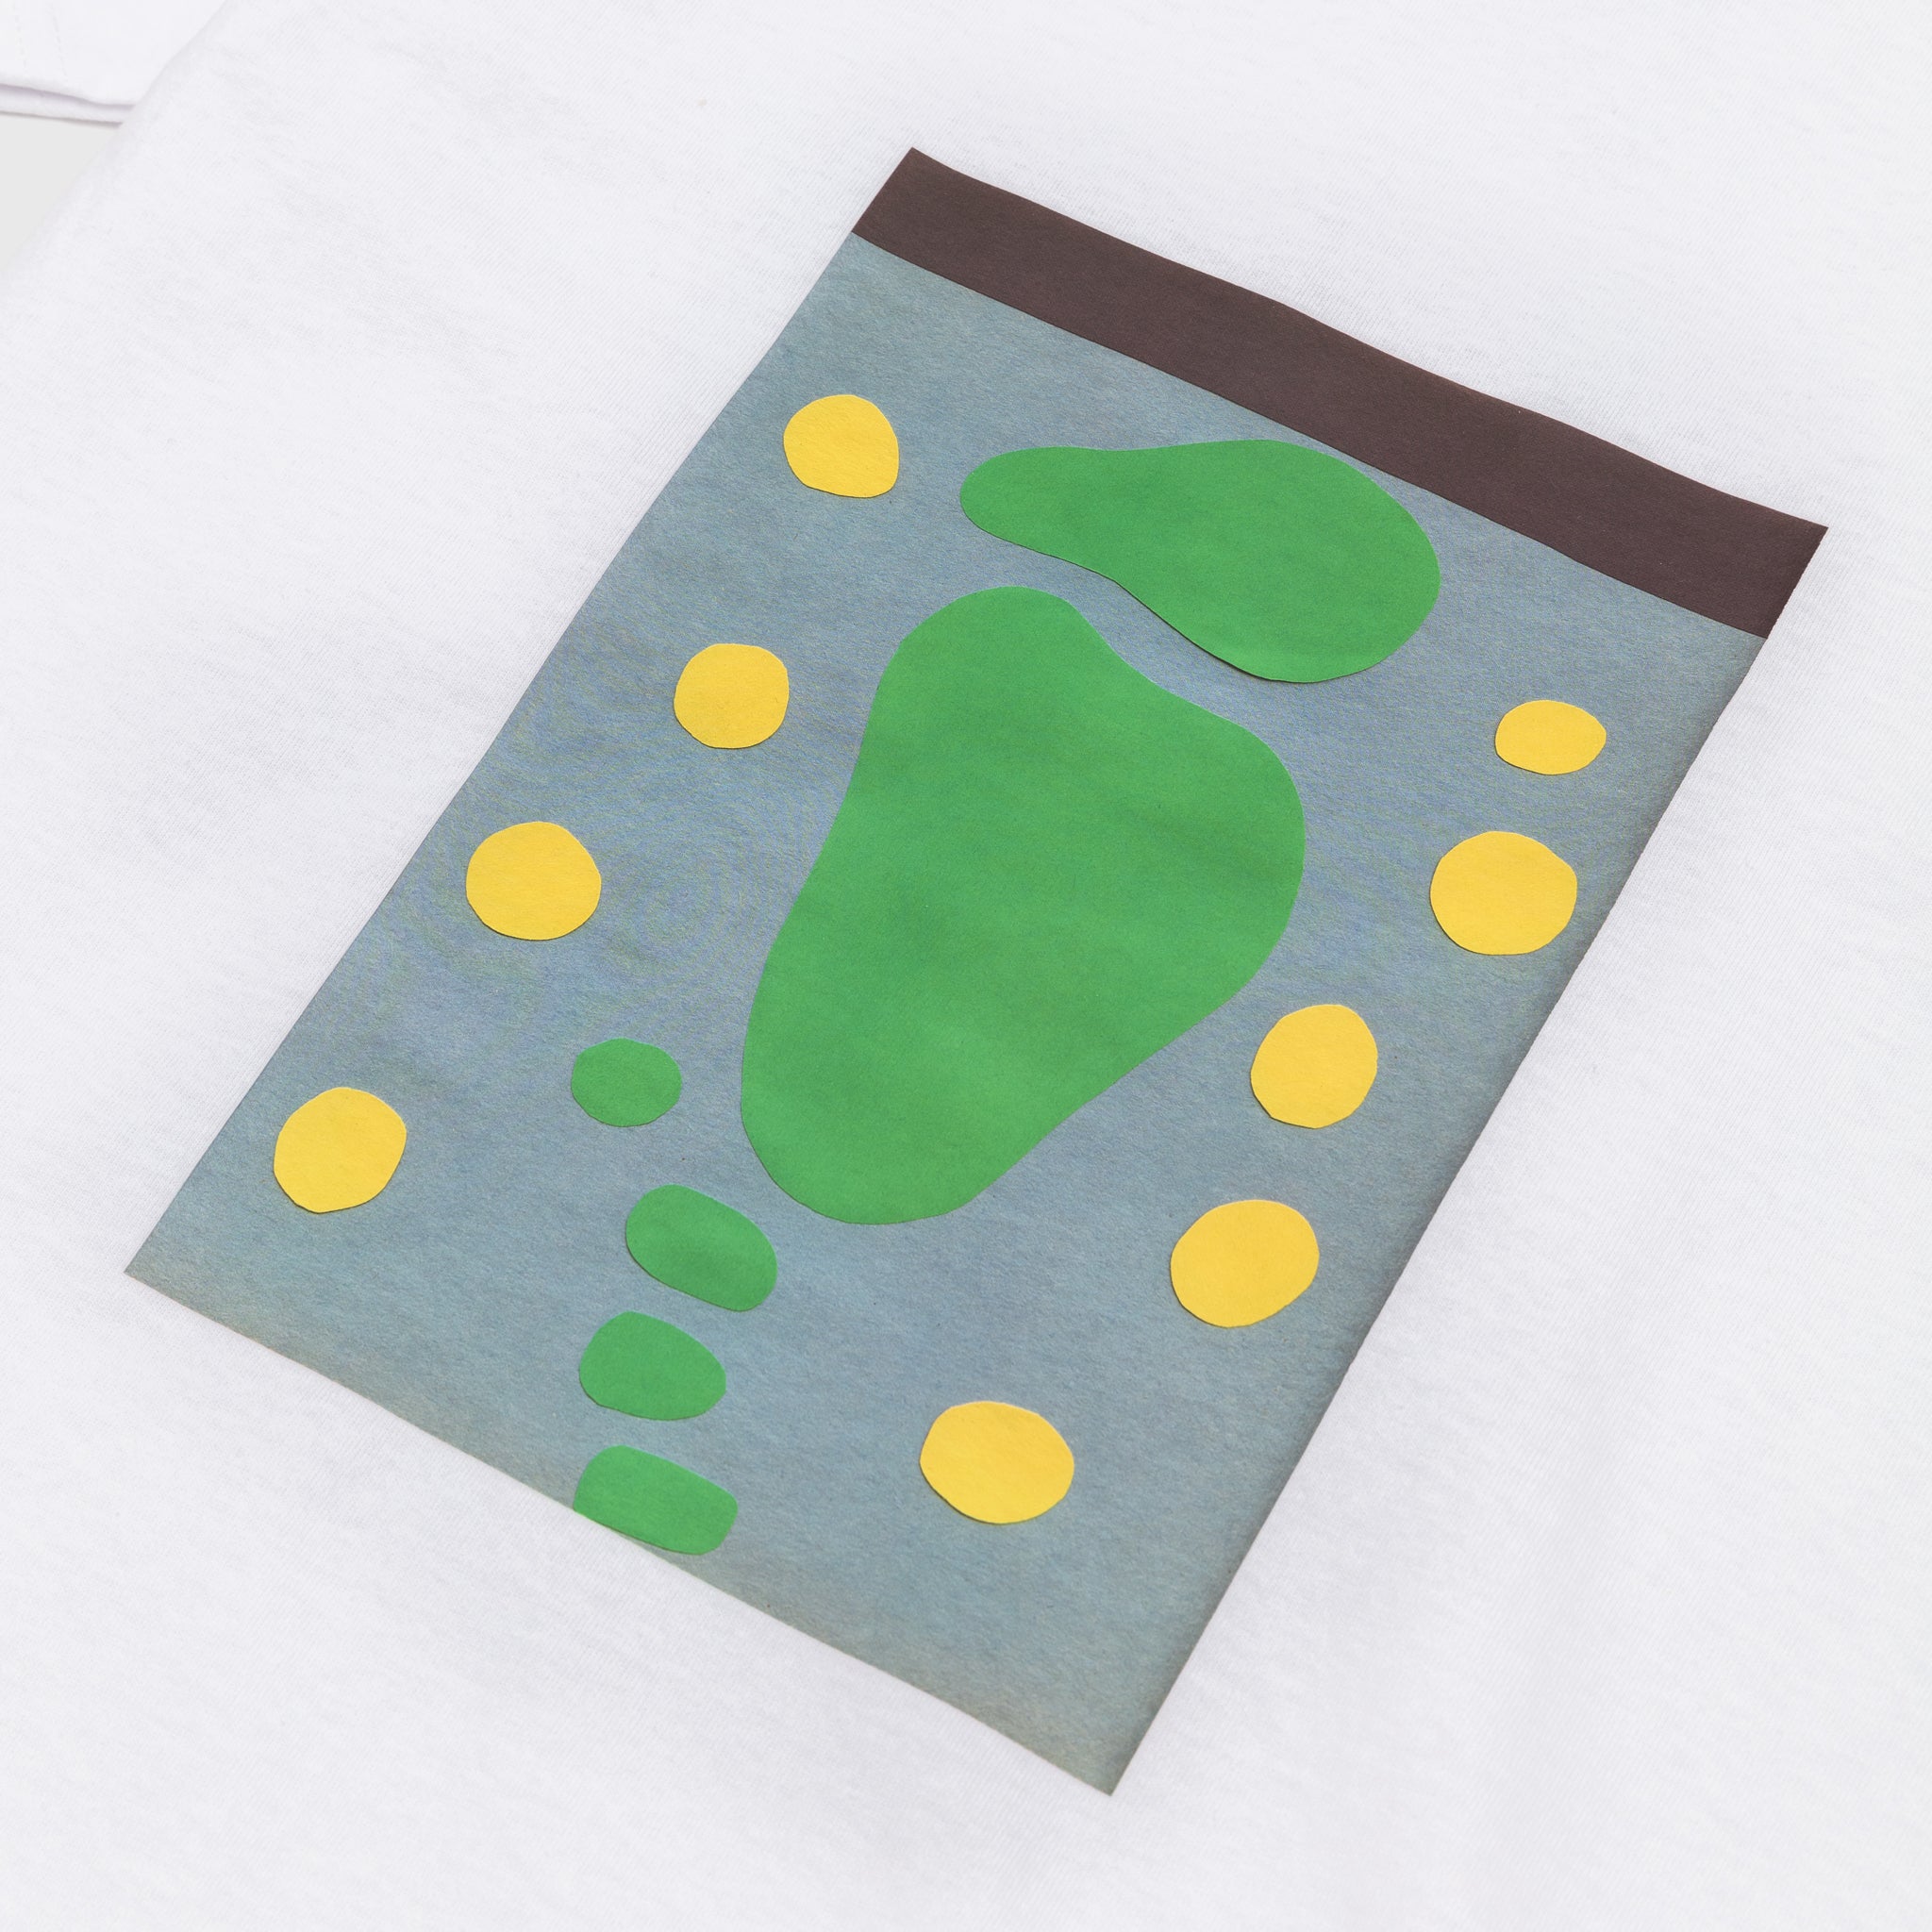 MATISSE LISTENING TO ALICE COLTRANE S/S T- SHIRT (COURSE MAP)